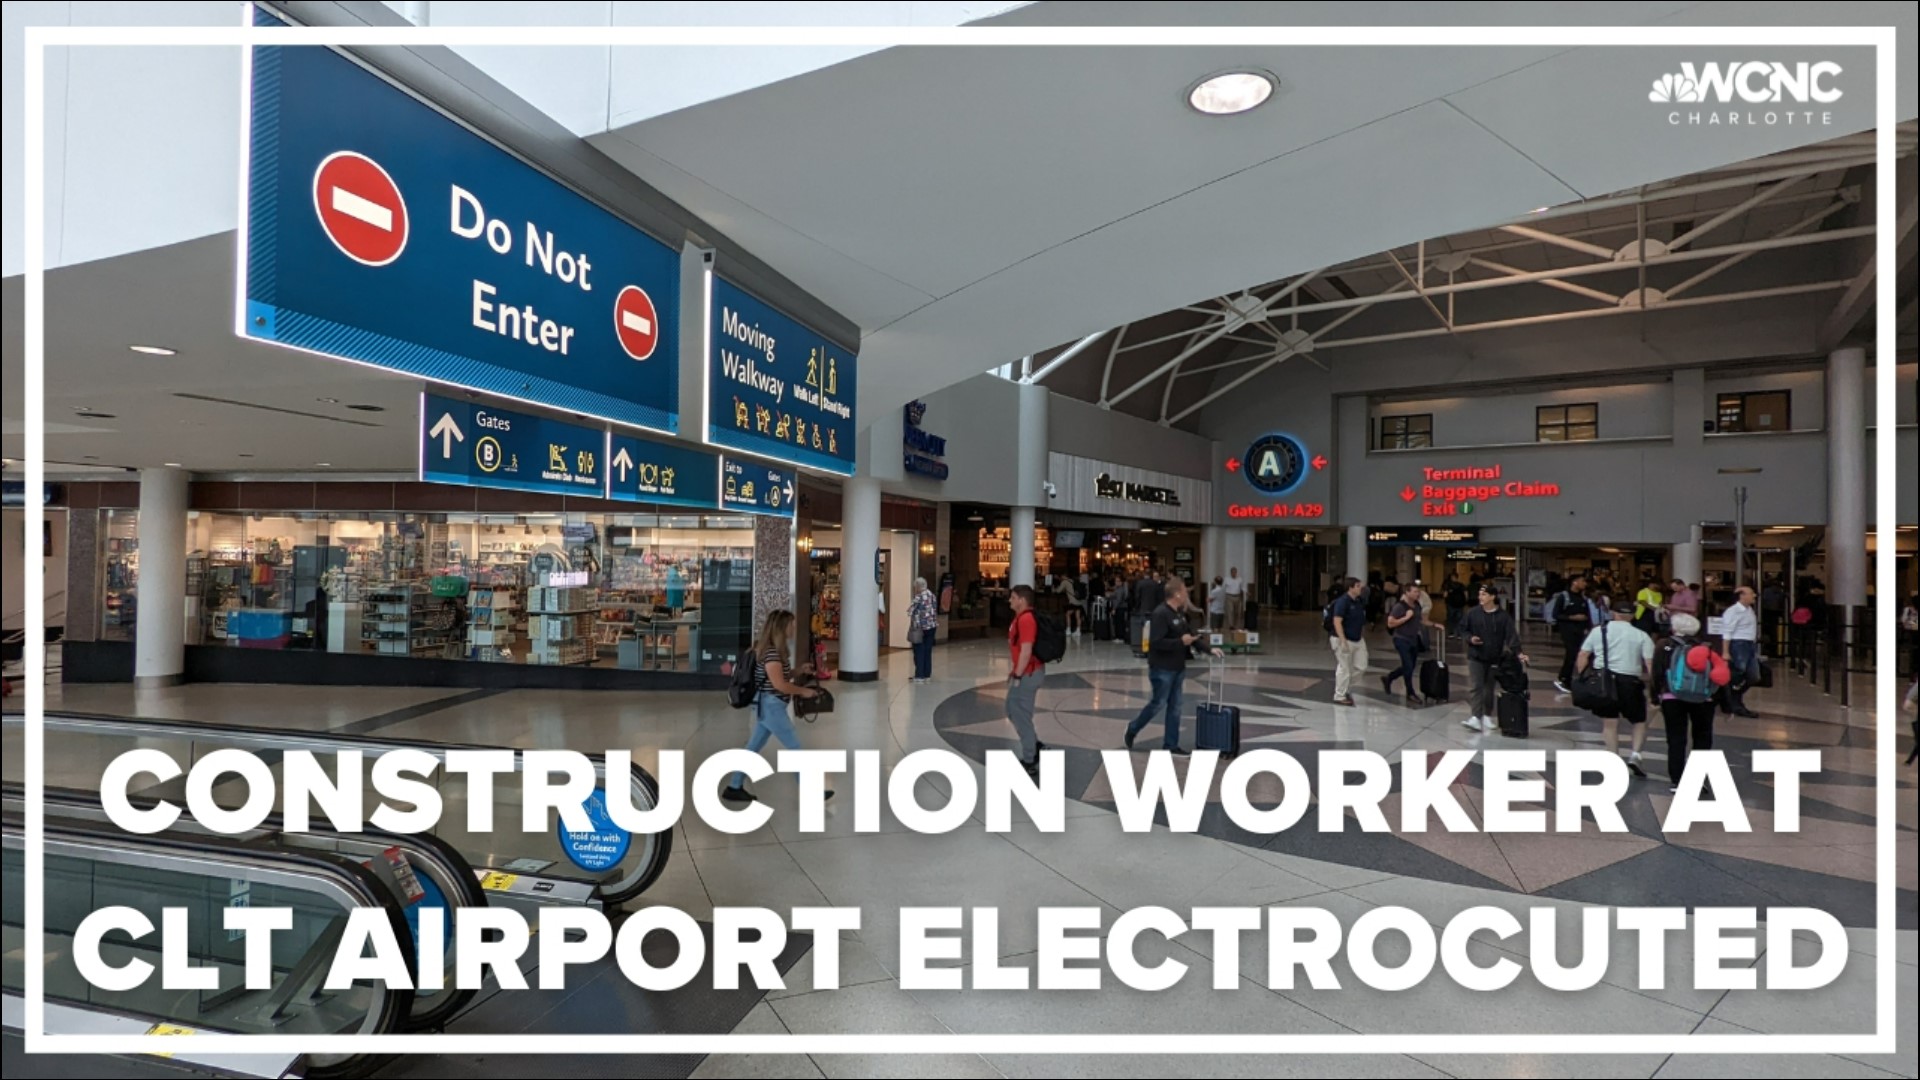 A construction worker died after being found unresponsive following an accidental electrocution at Charlotte Douglas International Airport over the weekend.